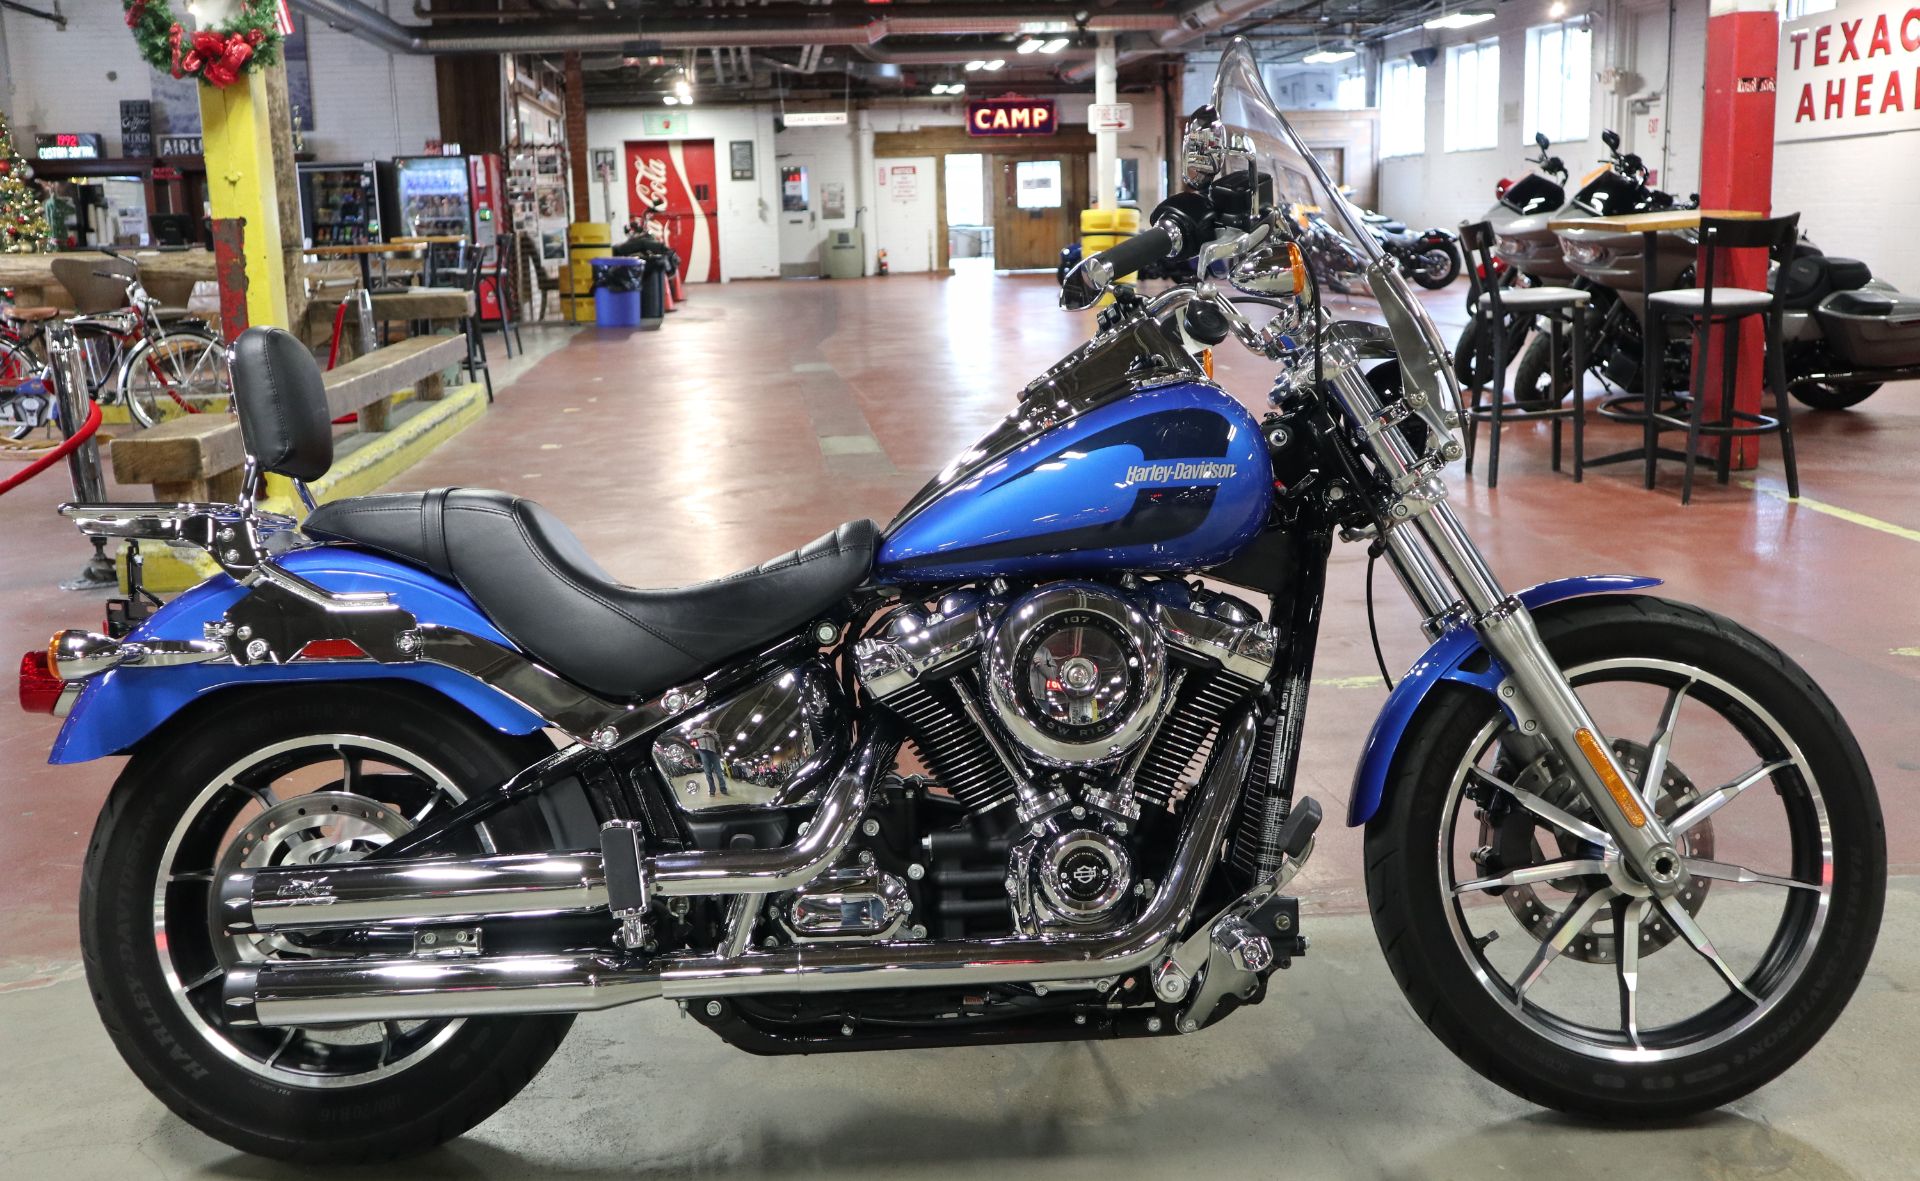 2018 Harley-Davidson Low Rider® 107 in New London, Connecticut - Photo 8